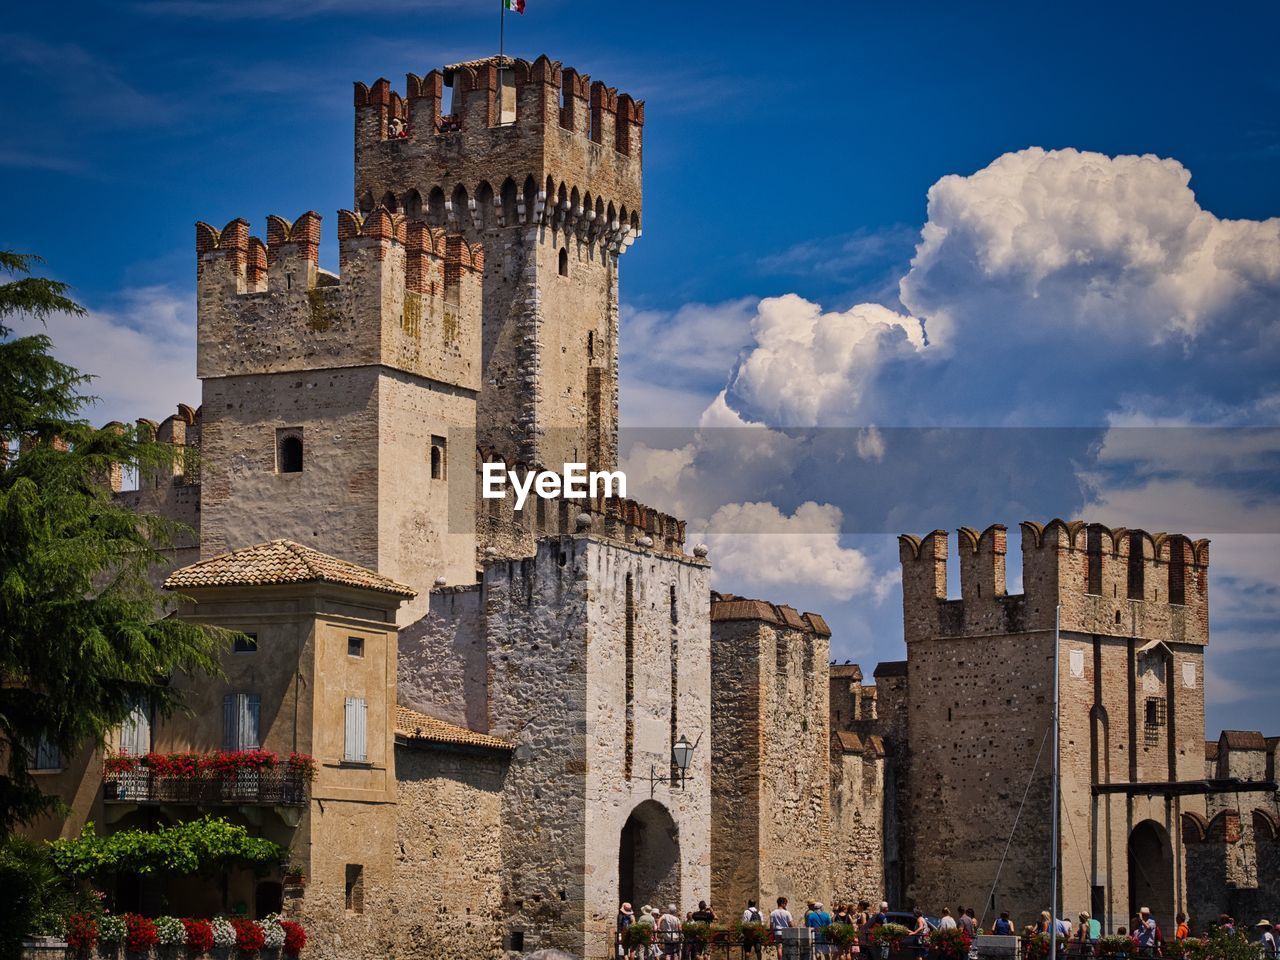 Castle in sirmione, italy